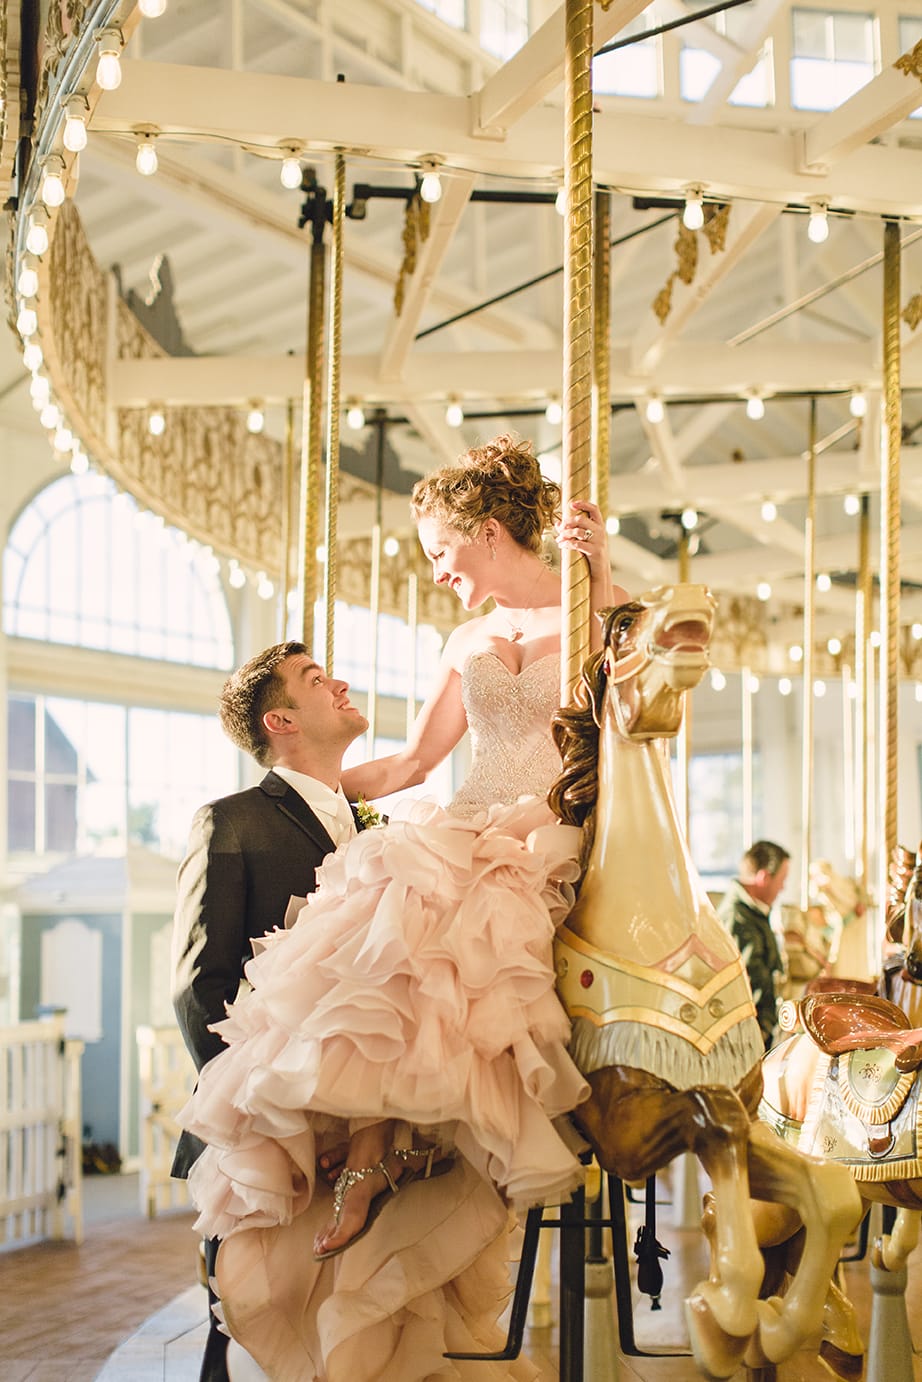 Blush Wedding Dress at Carnival-Themed Wedding - Maggie Bride wearing Serencia by Maggie Sottero